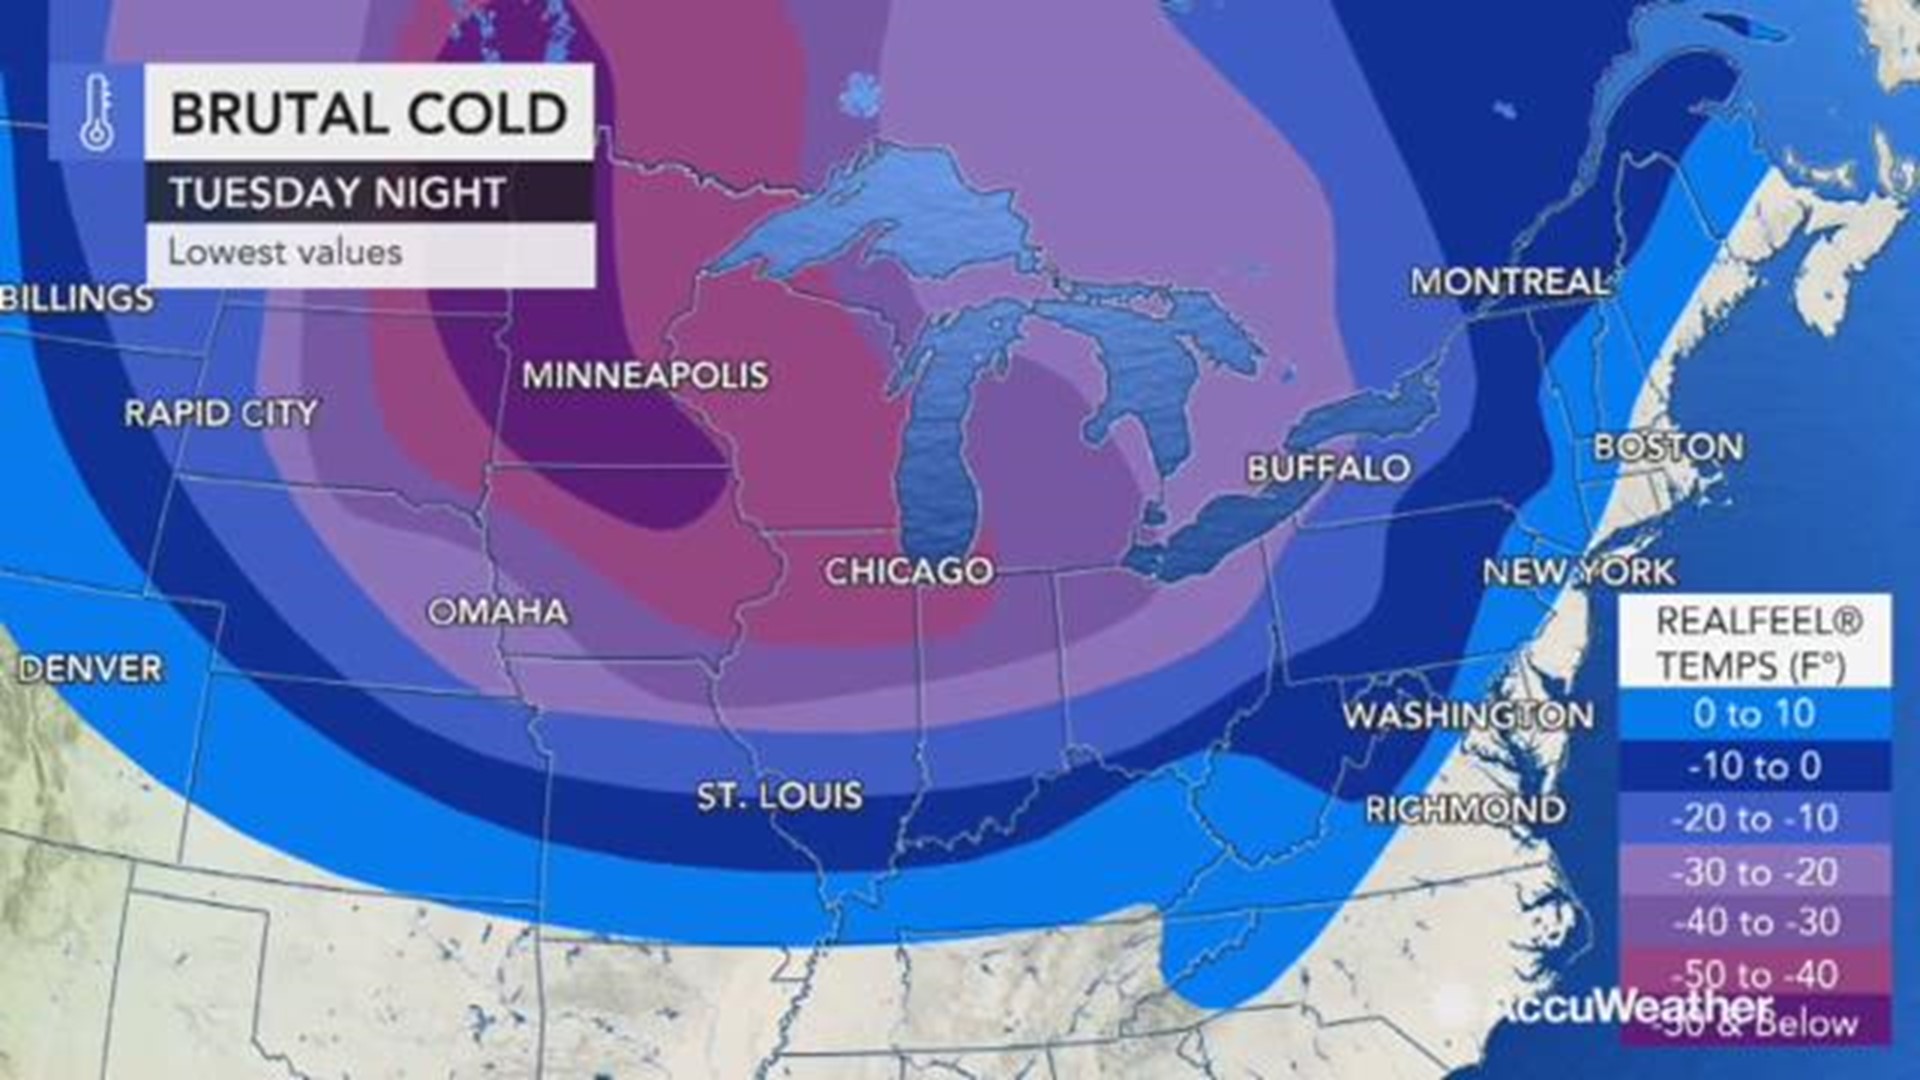 As brutally cold air invades the Midwest and Northeast this week, some areas could see AccuWeather RealFeel temperatures dip below -50.